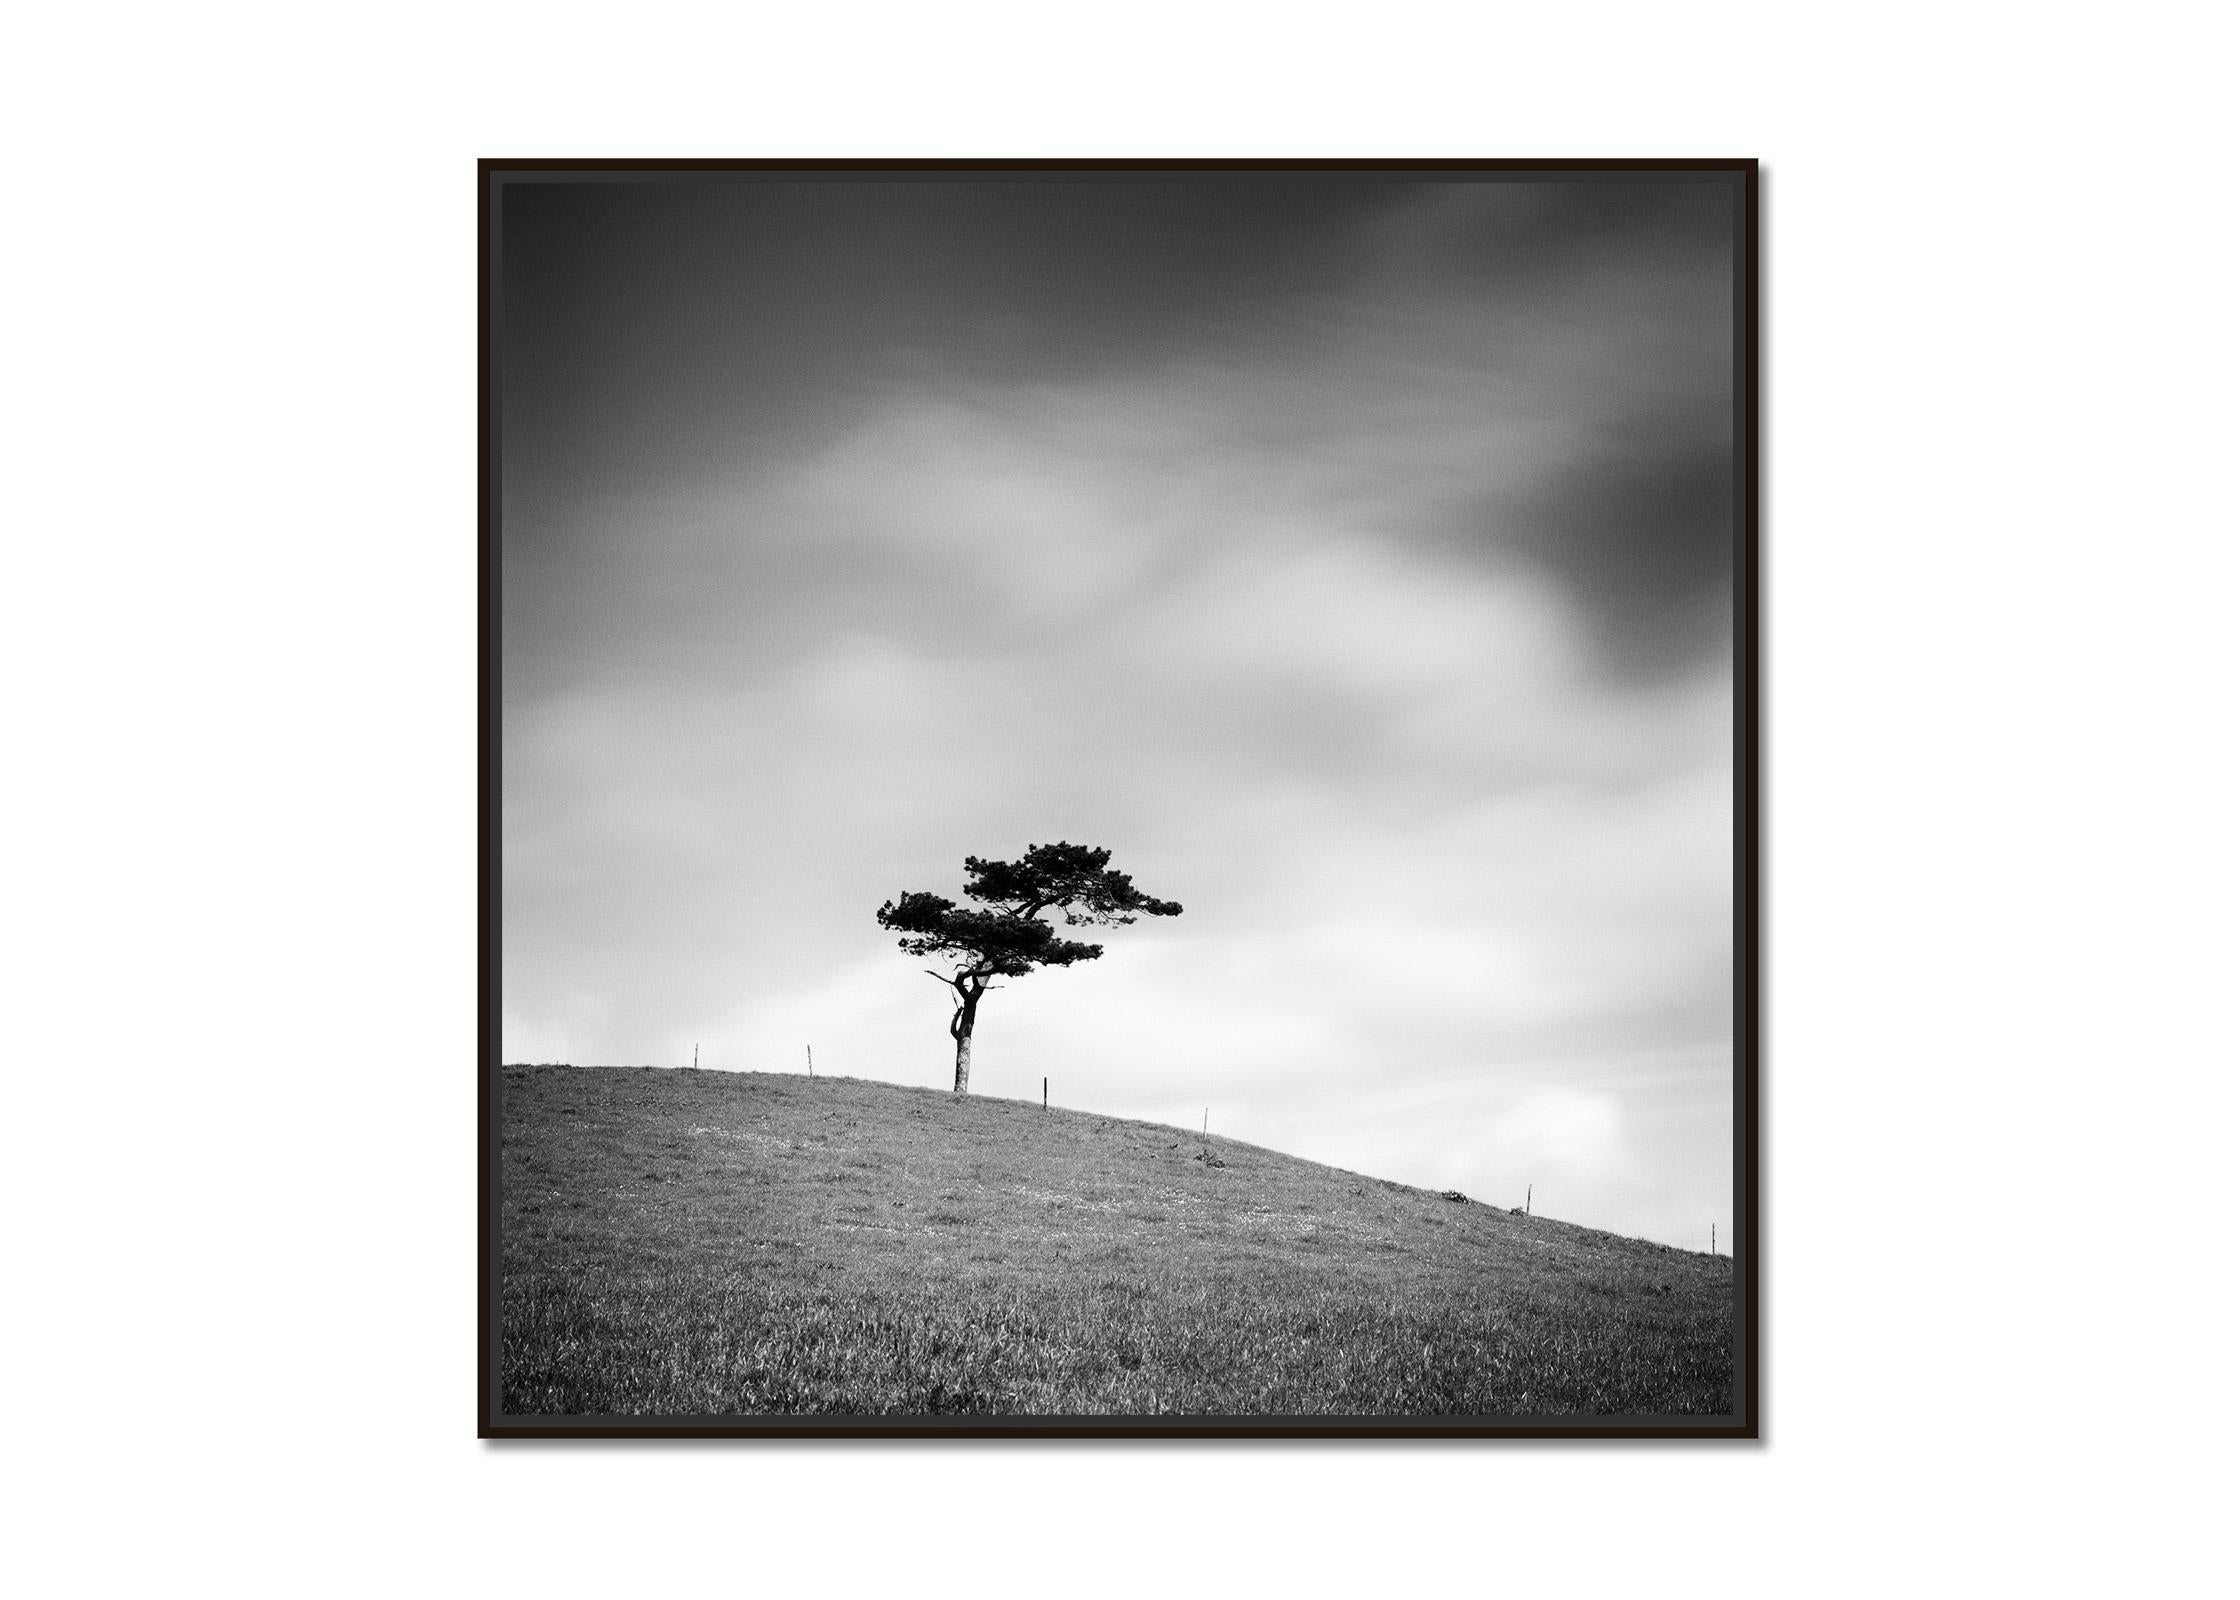 Beware of the Bull single Tree Ireland black white art photography landscape - Photograph by Gerald Berghammer